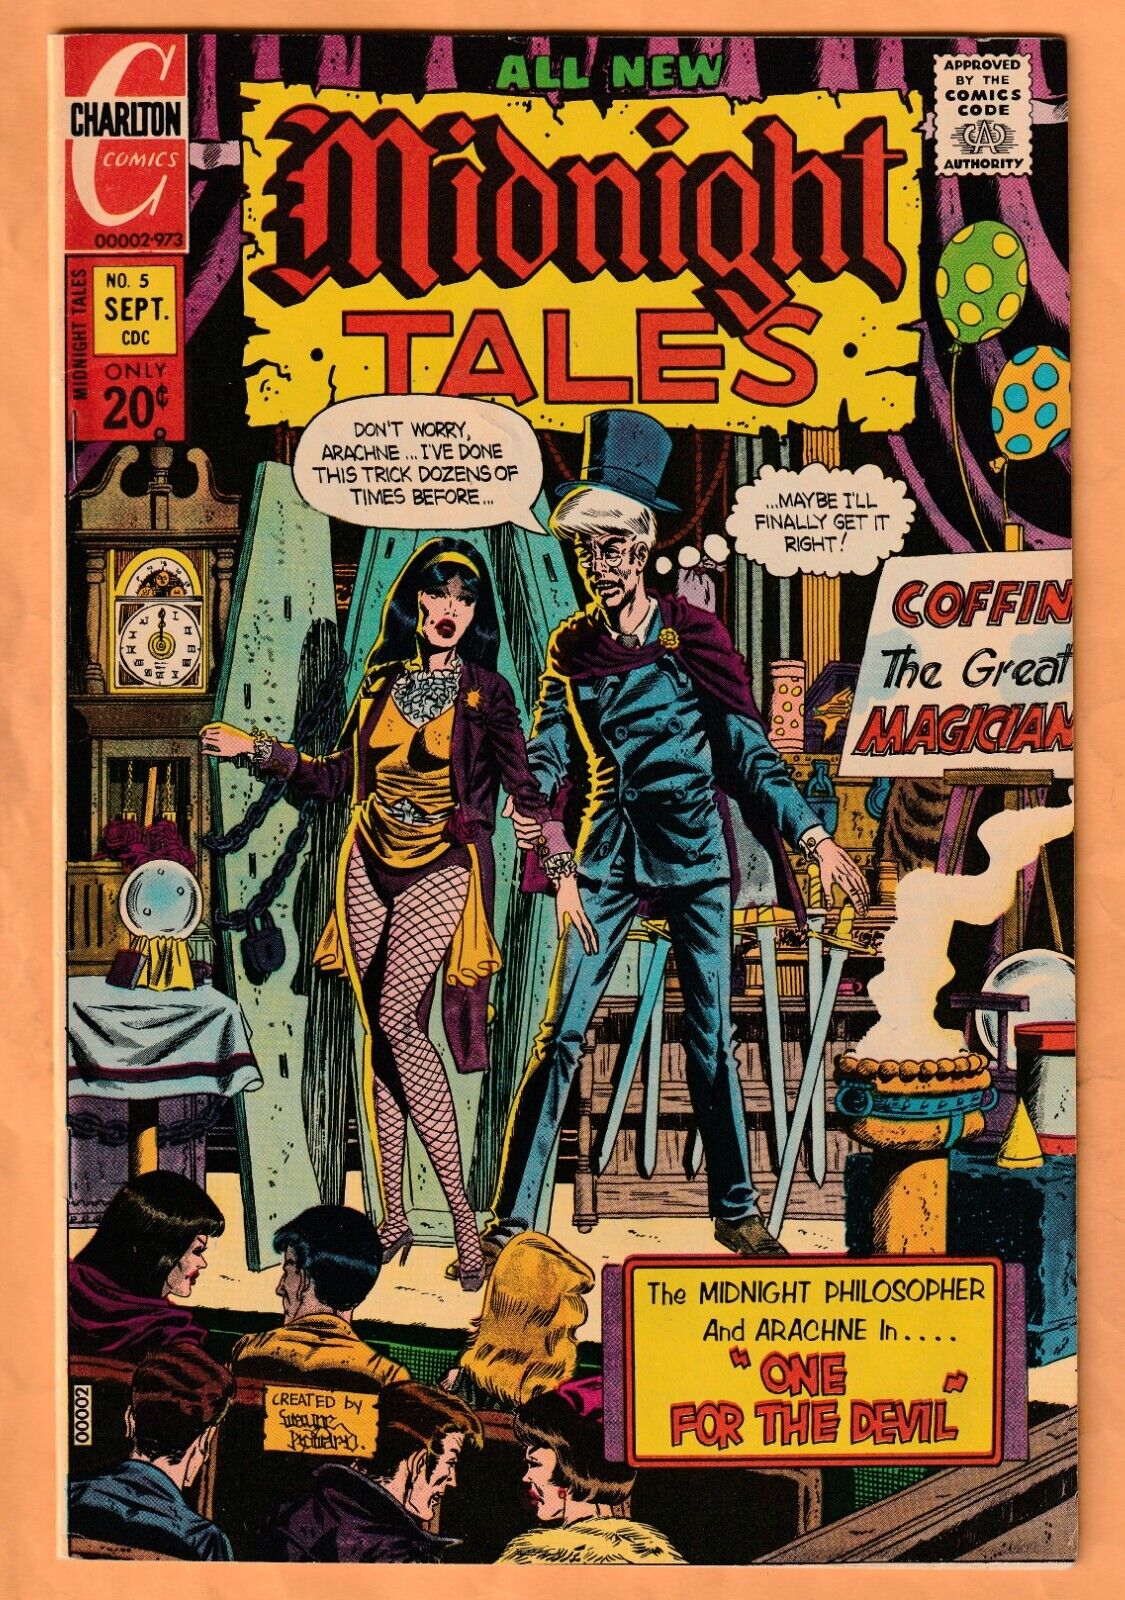 Charlton MIDNIGHT TALES No. 5 (1973) One for the Devil VF